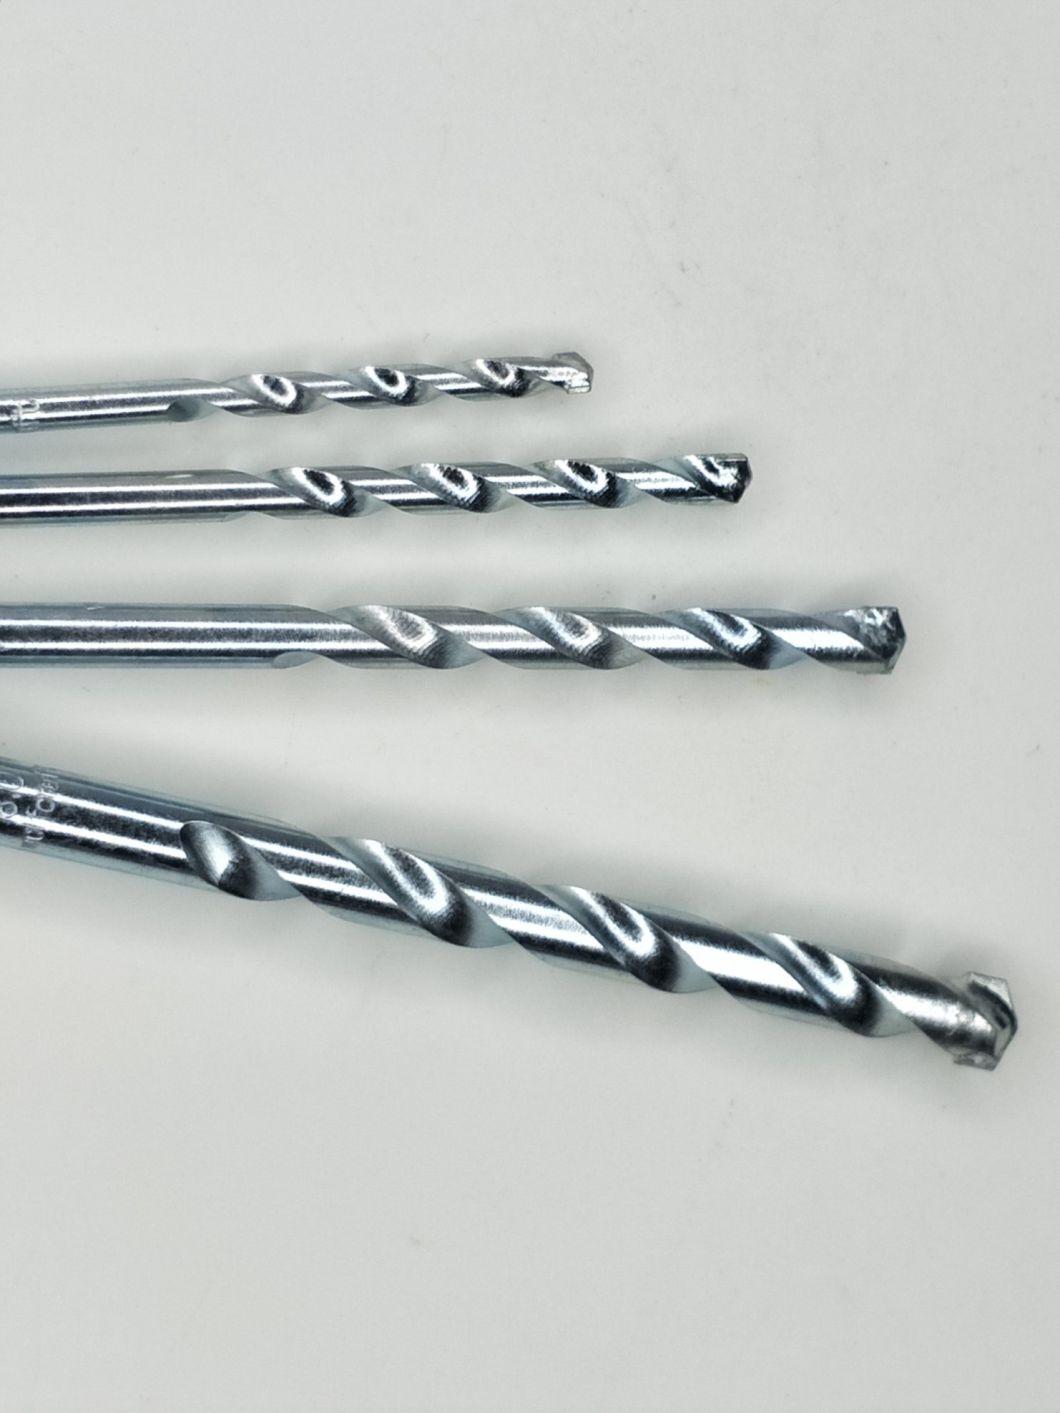 Chinese Supplier Best-Selling Masonry Drill Bit Accessories of Masonry Drilling